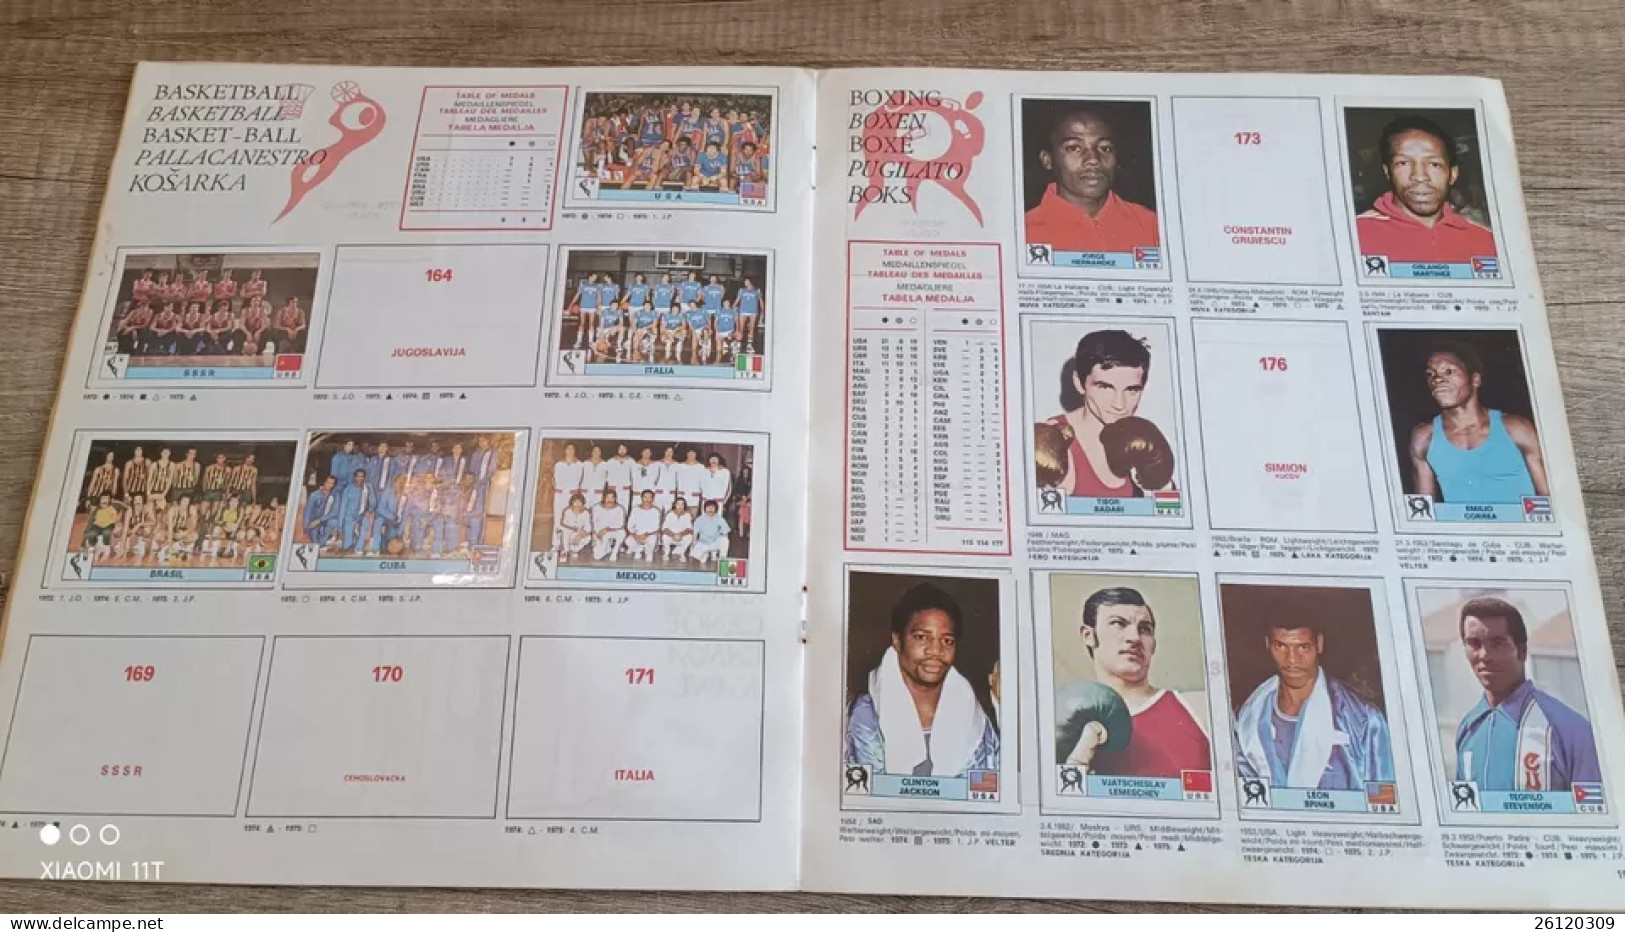 Montreal 1976 Panini Album From ex Yugoslavian Edition PAYPAL ONLY